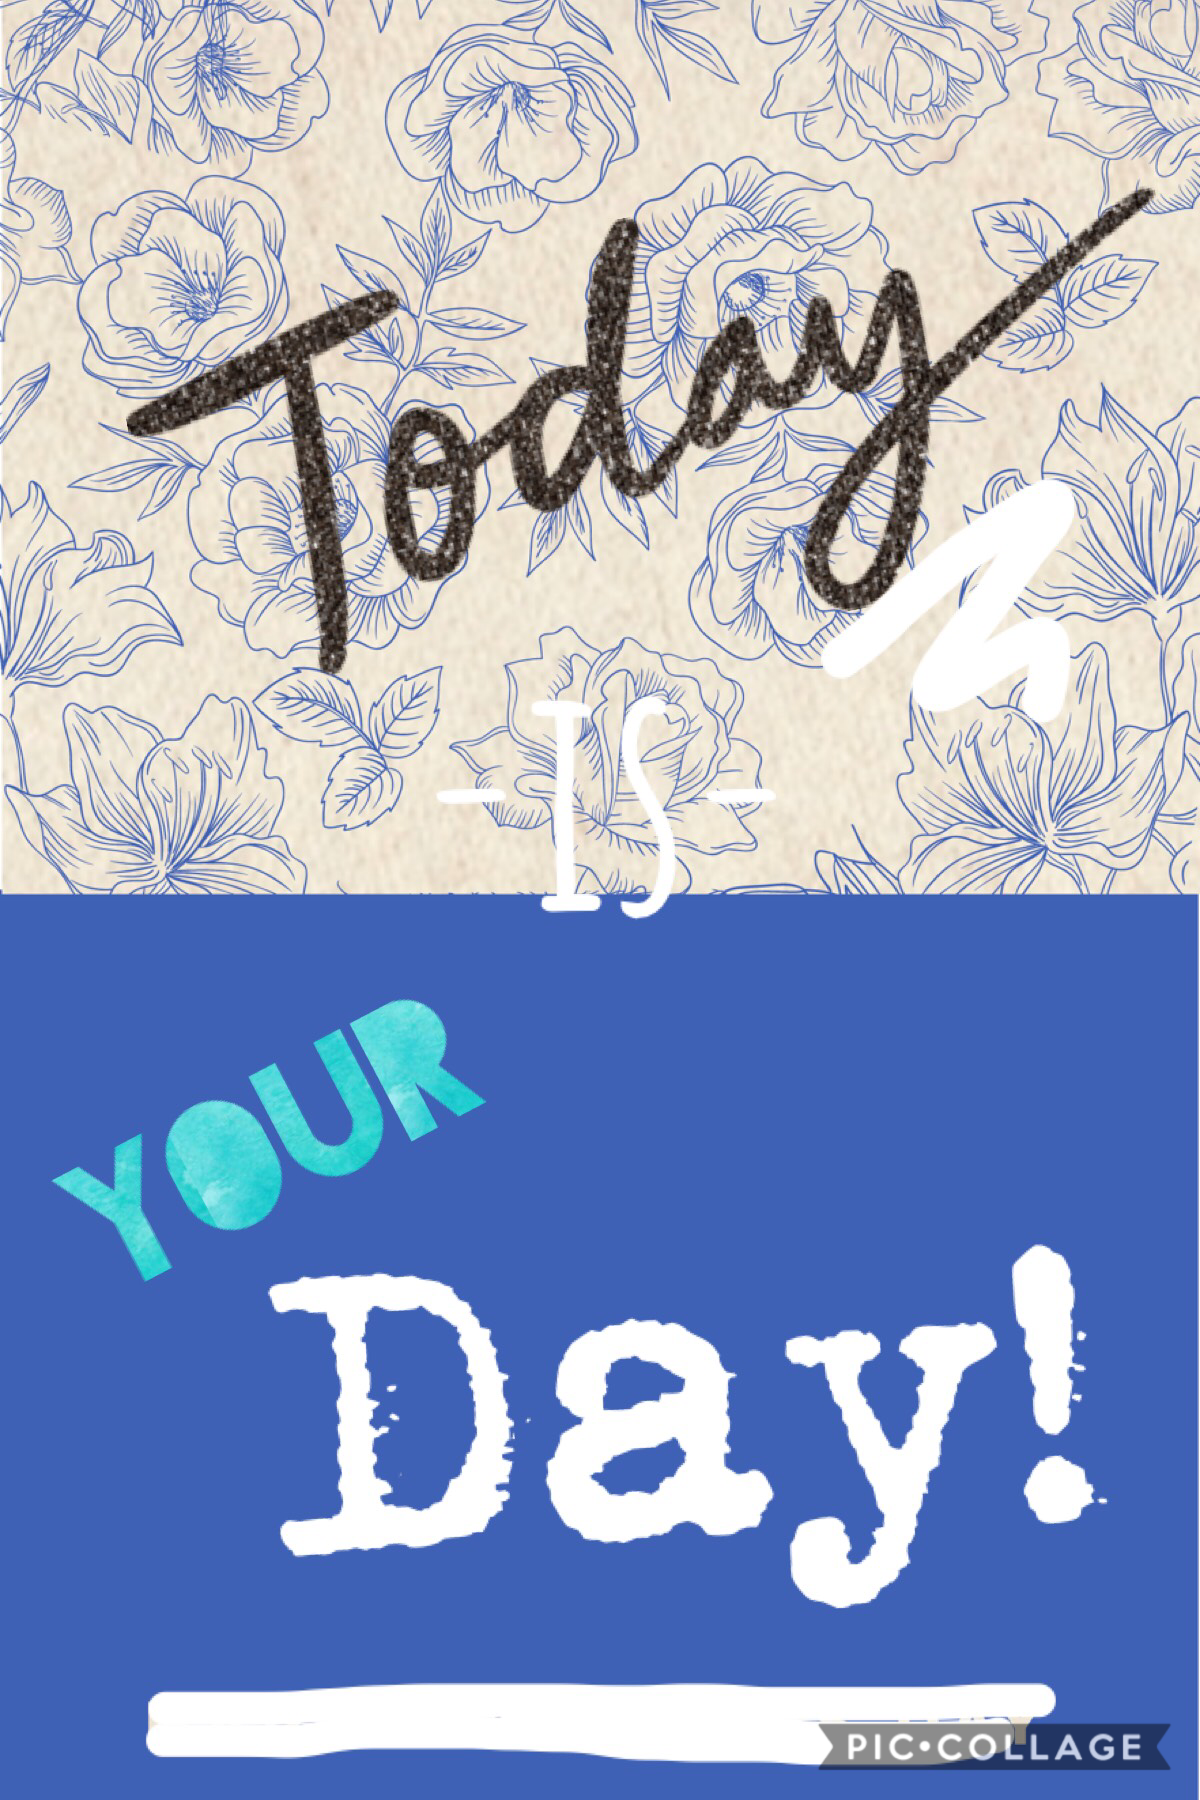 Today is your day!!!